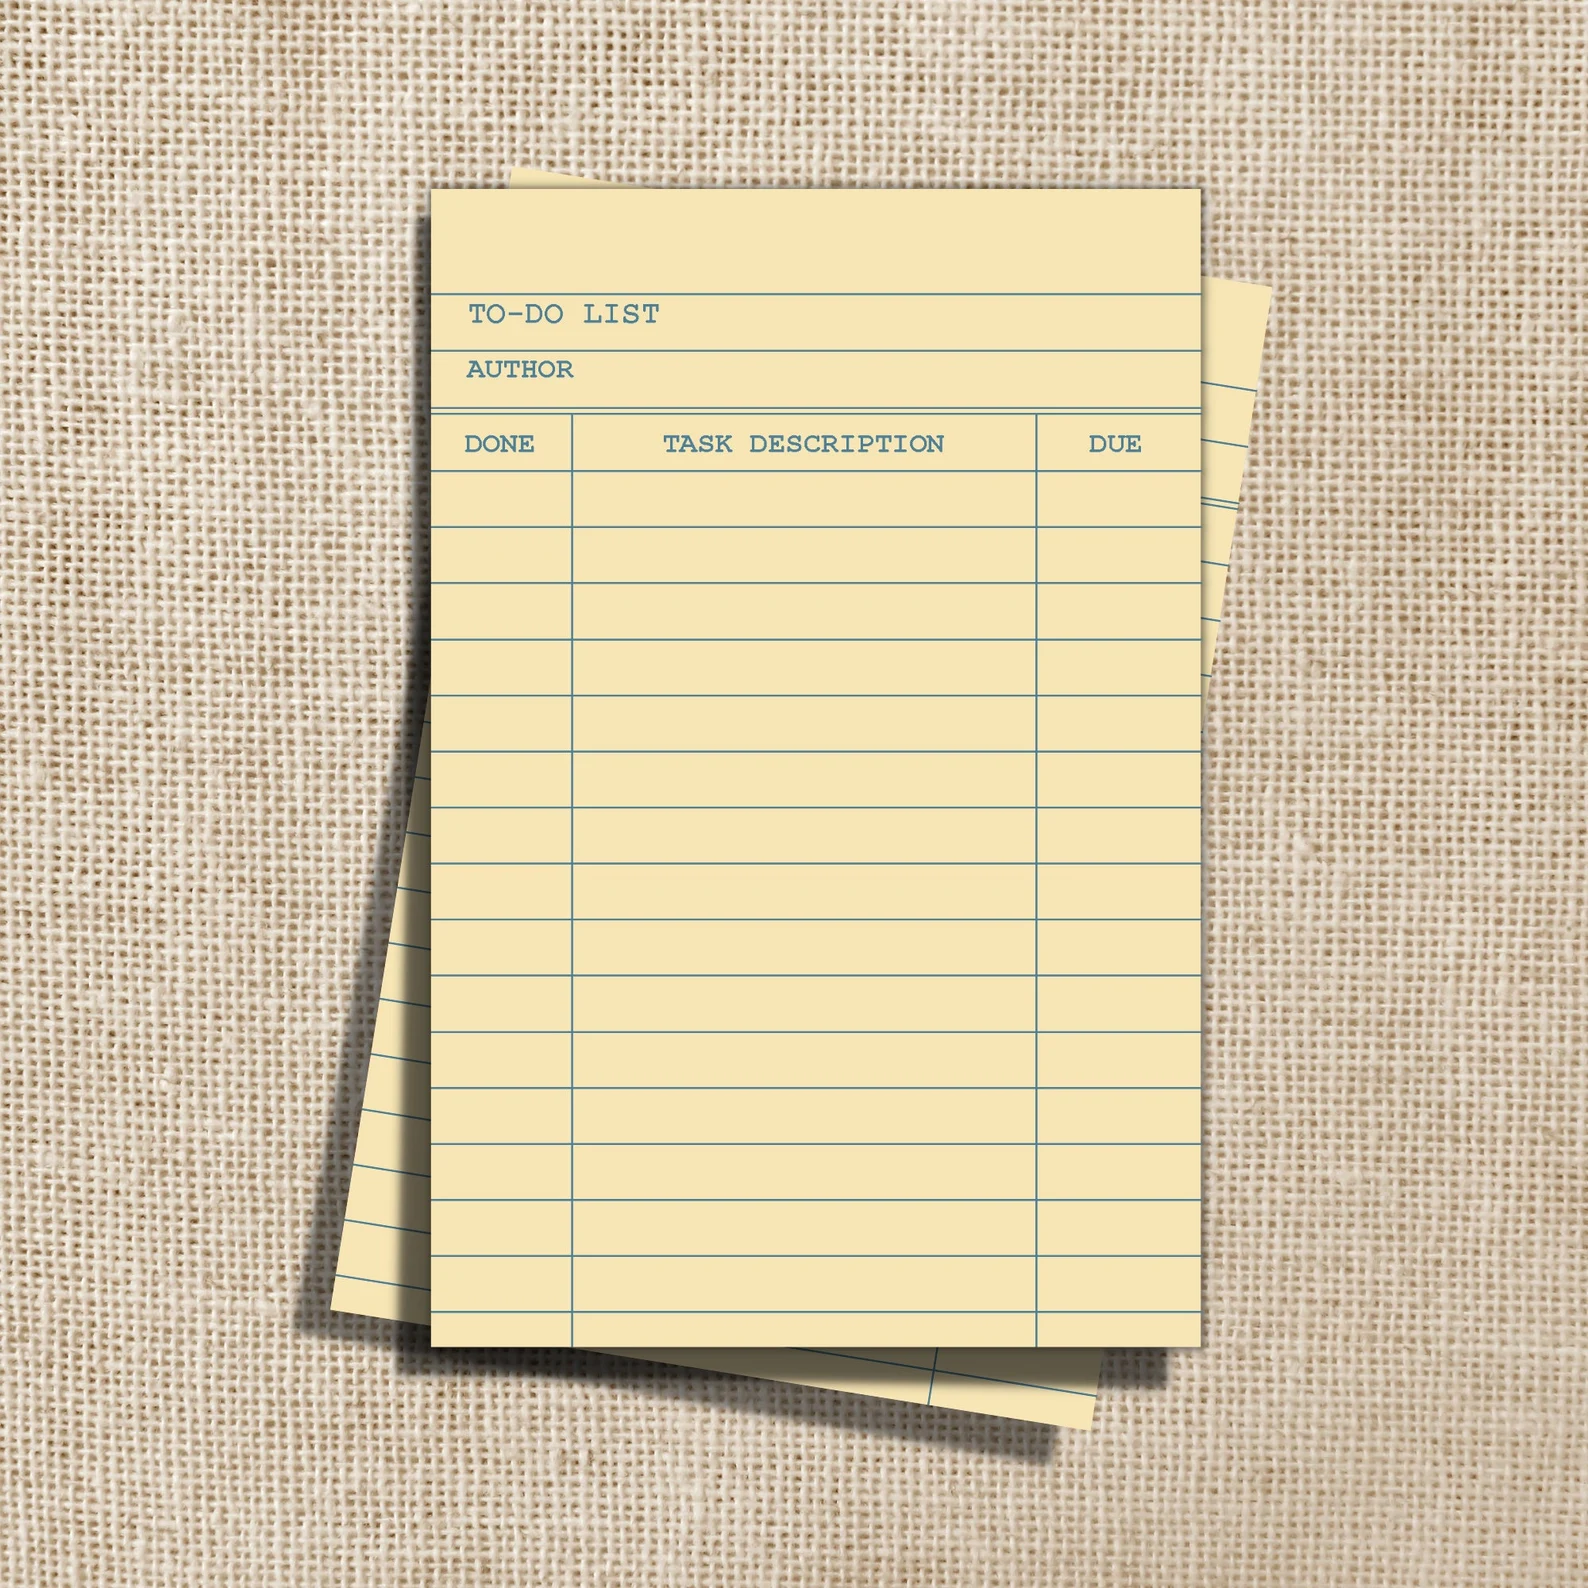 a yellow to-do list pad in the shape and style of library checkout cards